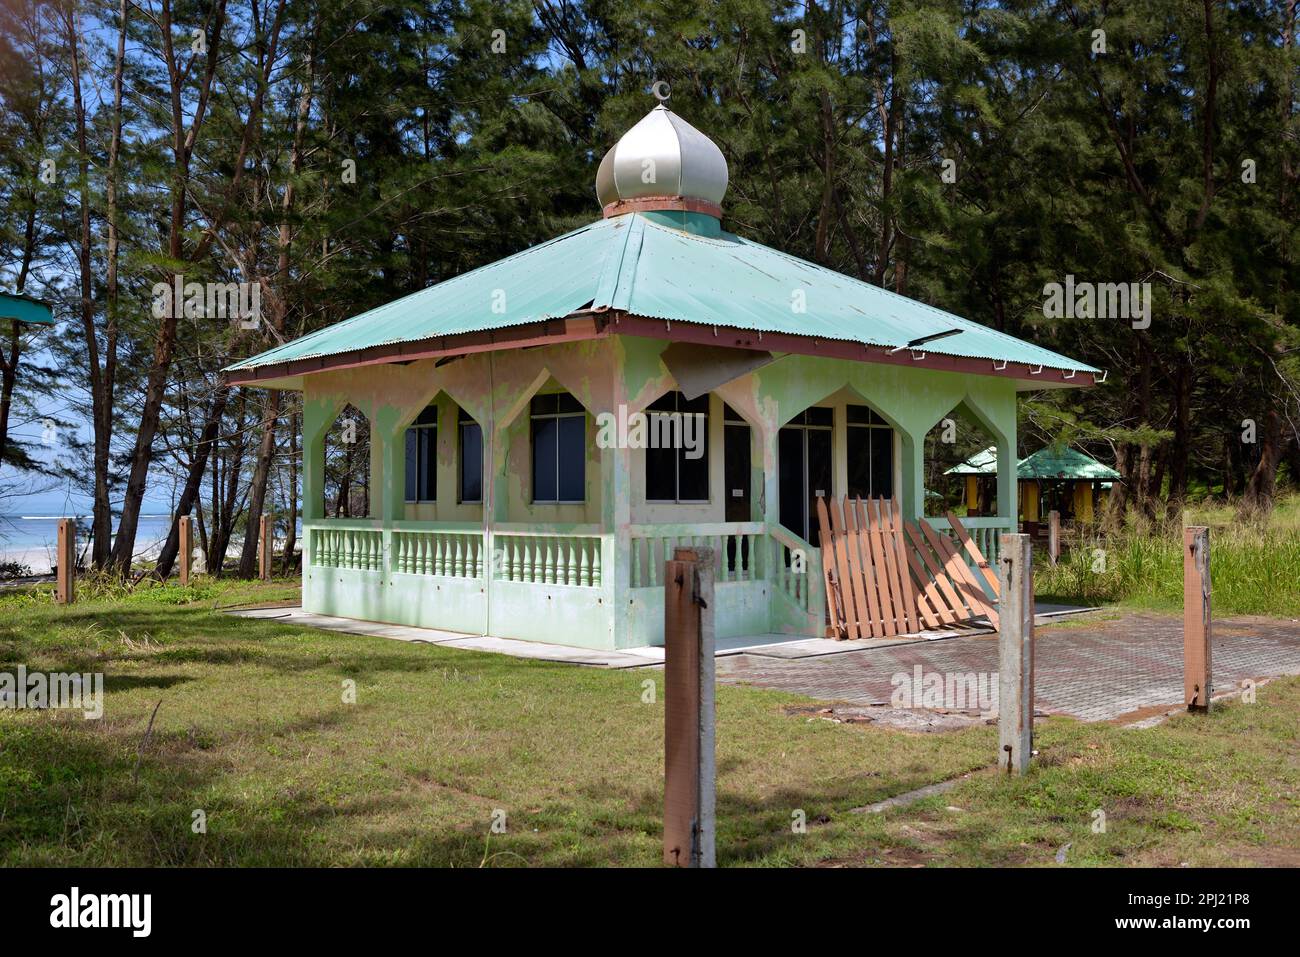 A mosque by the beach at the Tip of Borneo, Malaysia. Stock Photo